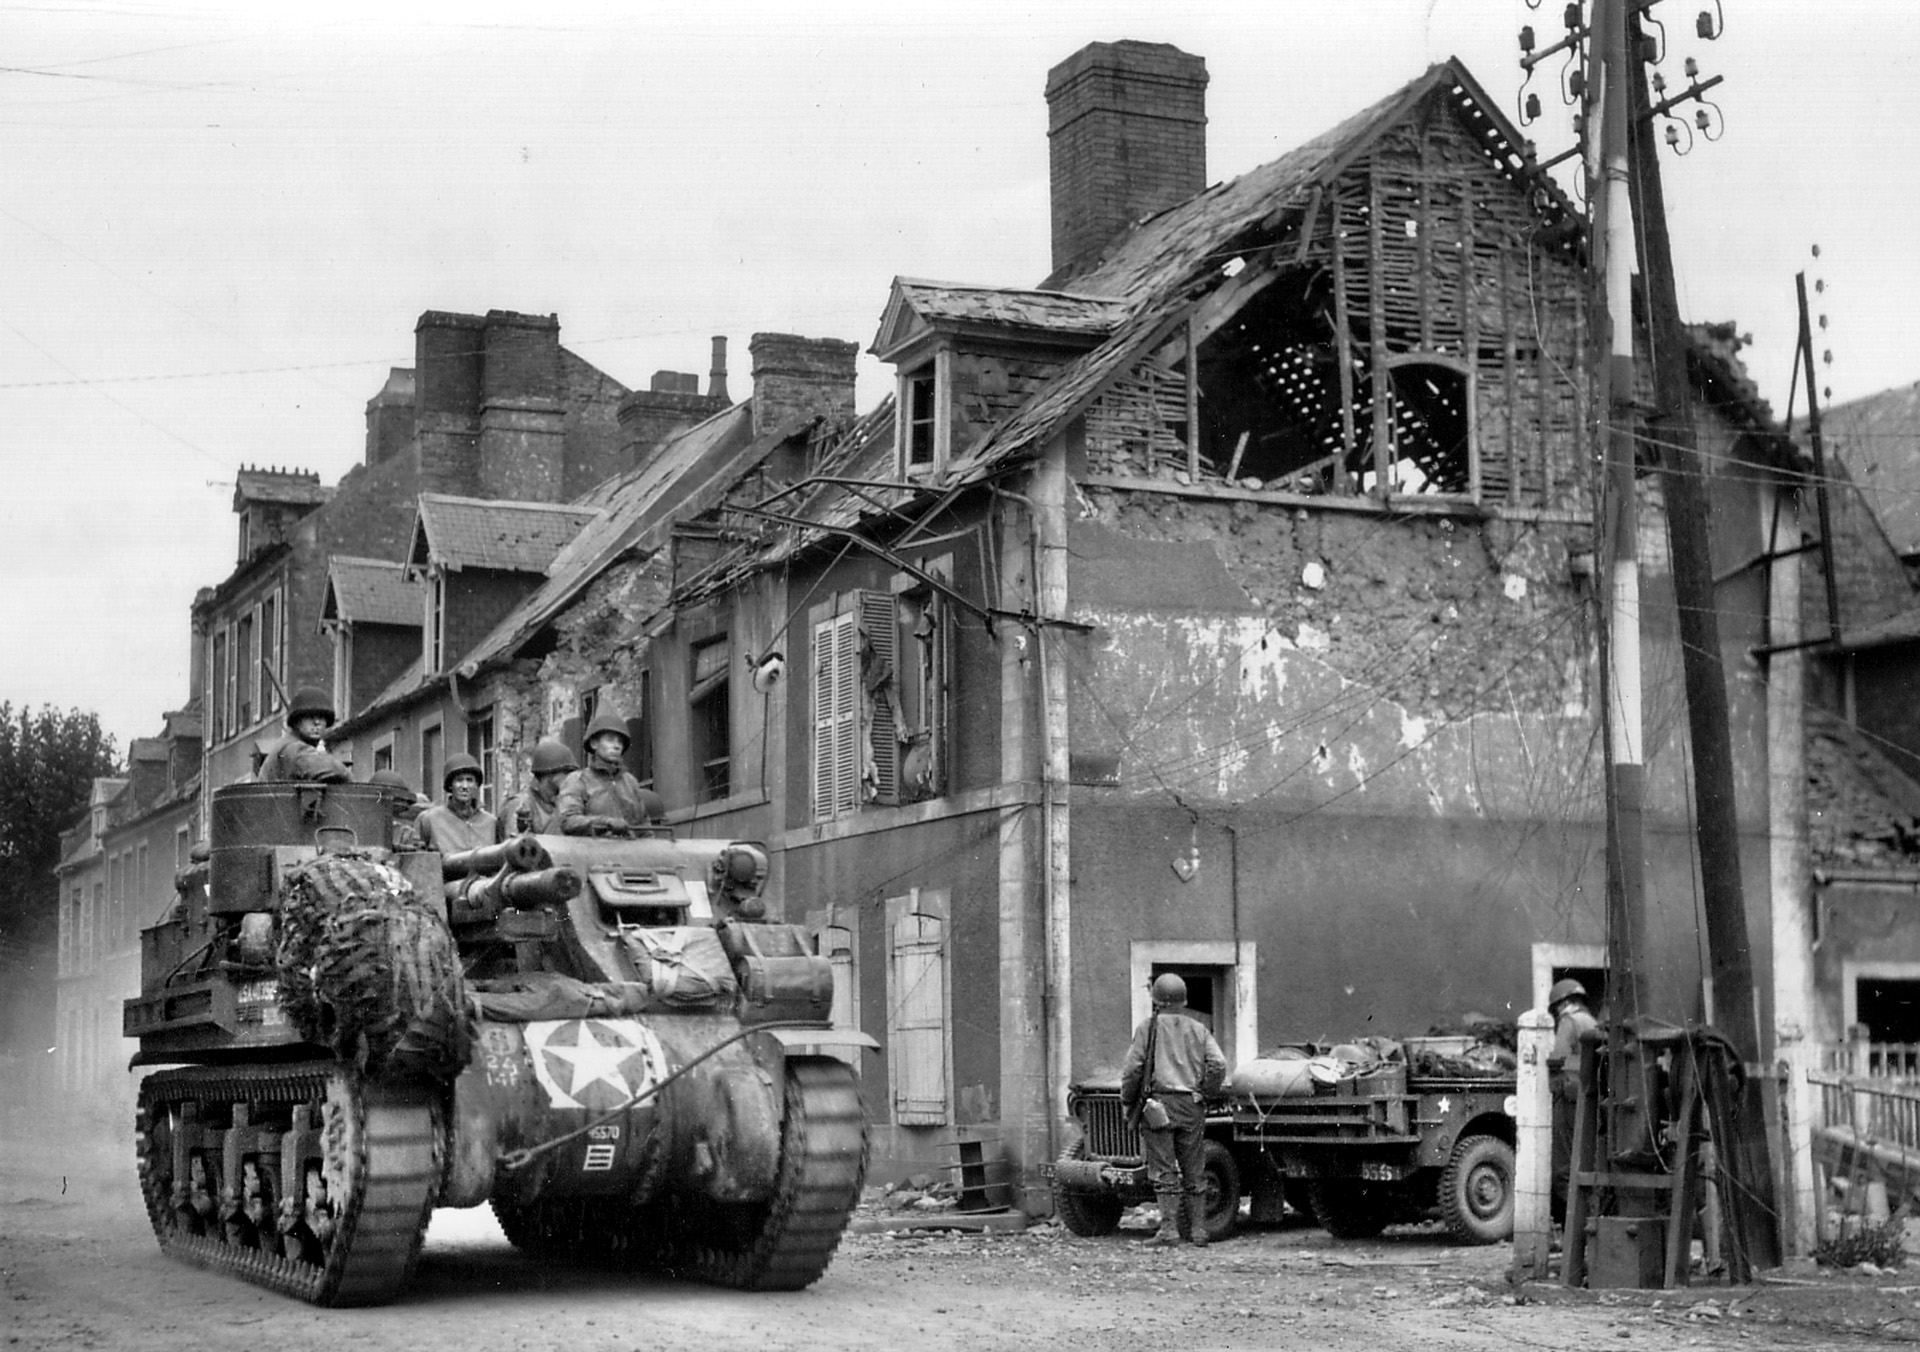 With Carentan secured, an M7 “Priest” self-propelled gun of the 14th Armored Field Artillery Battalion, 2nd Armored Division, rolls through the intersection of Holgate Street near the train station on June 18, 1944. 